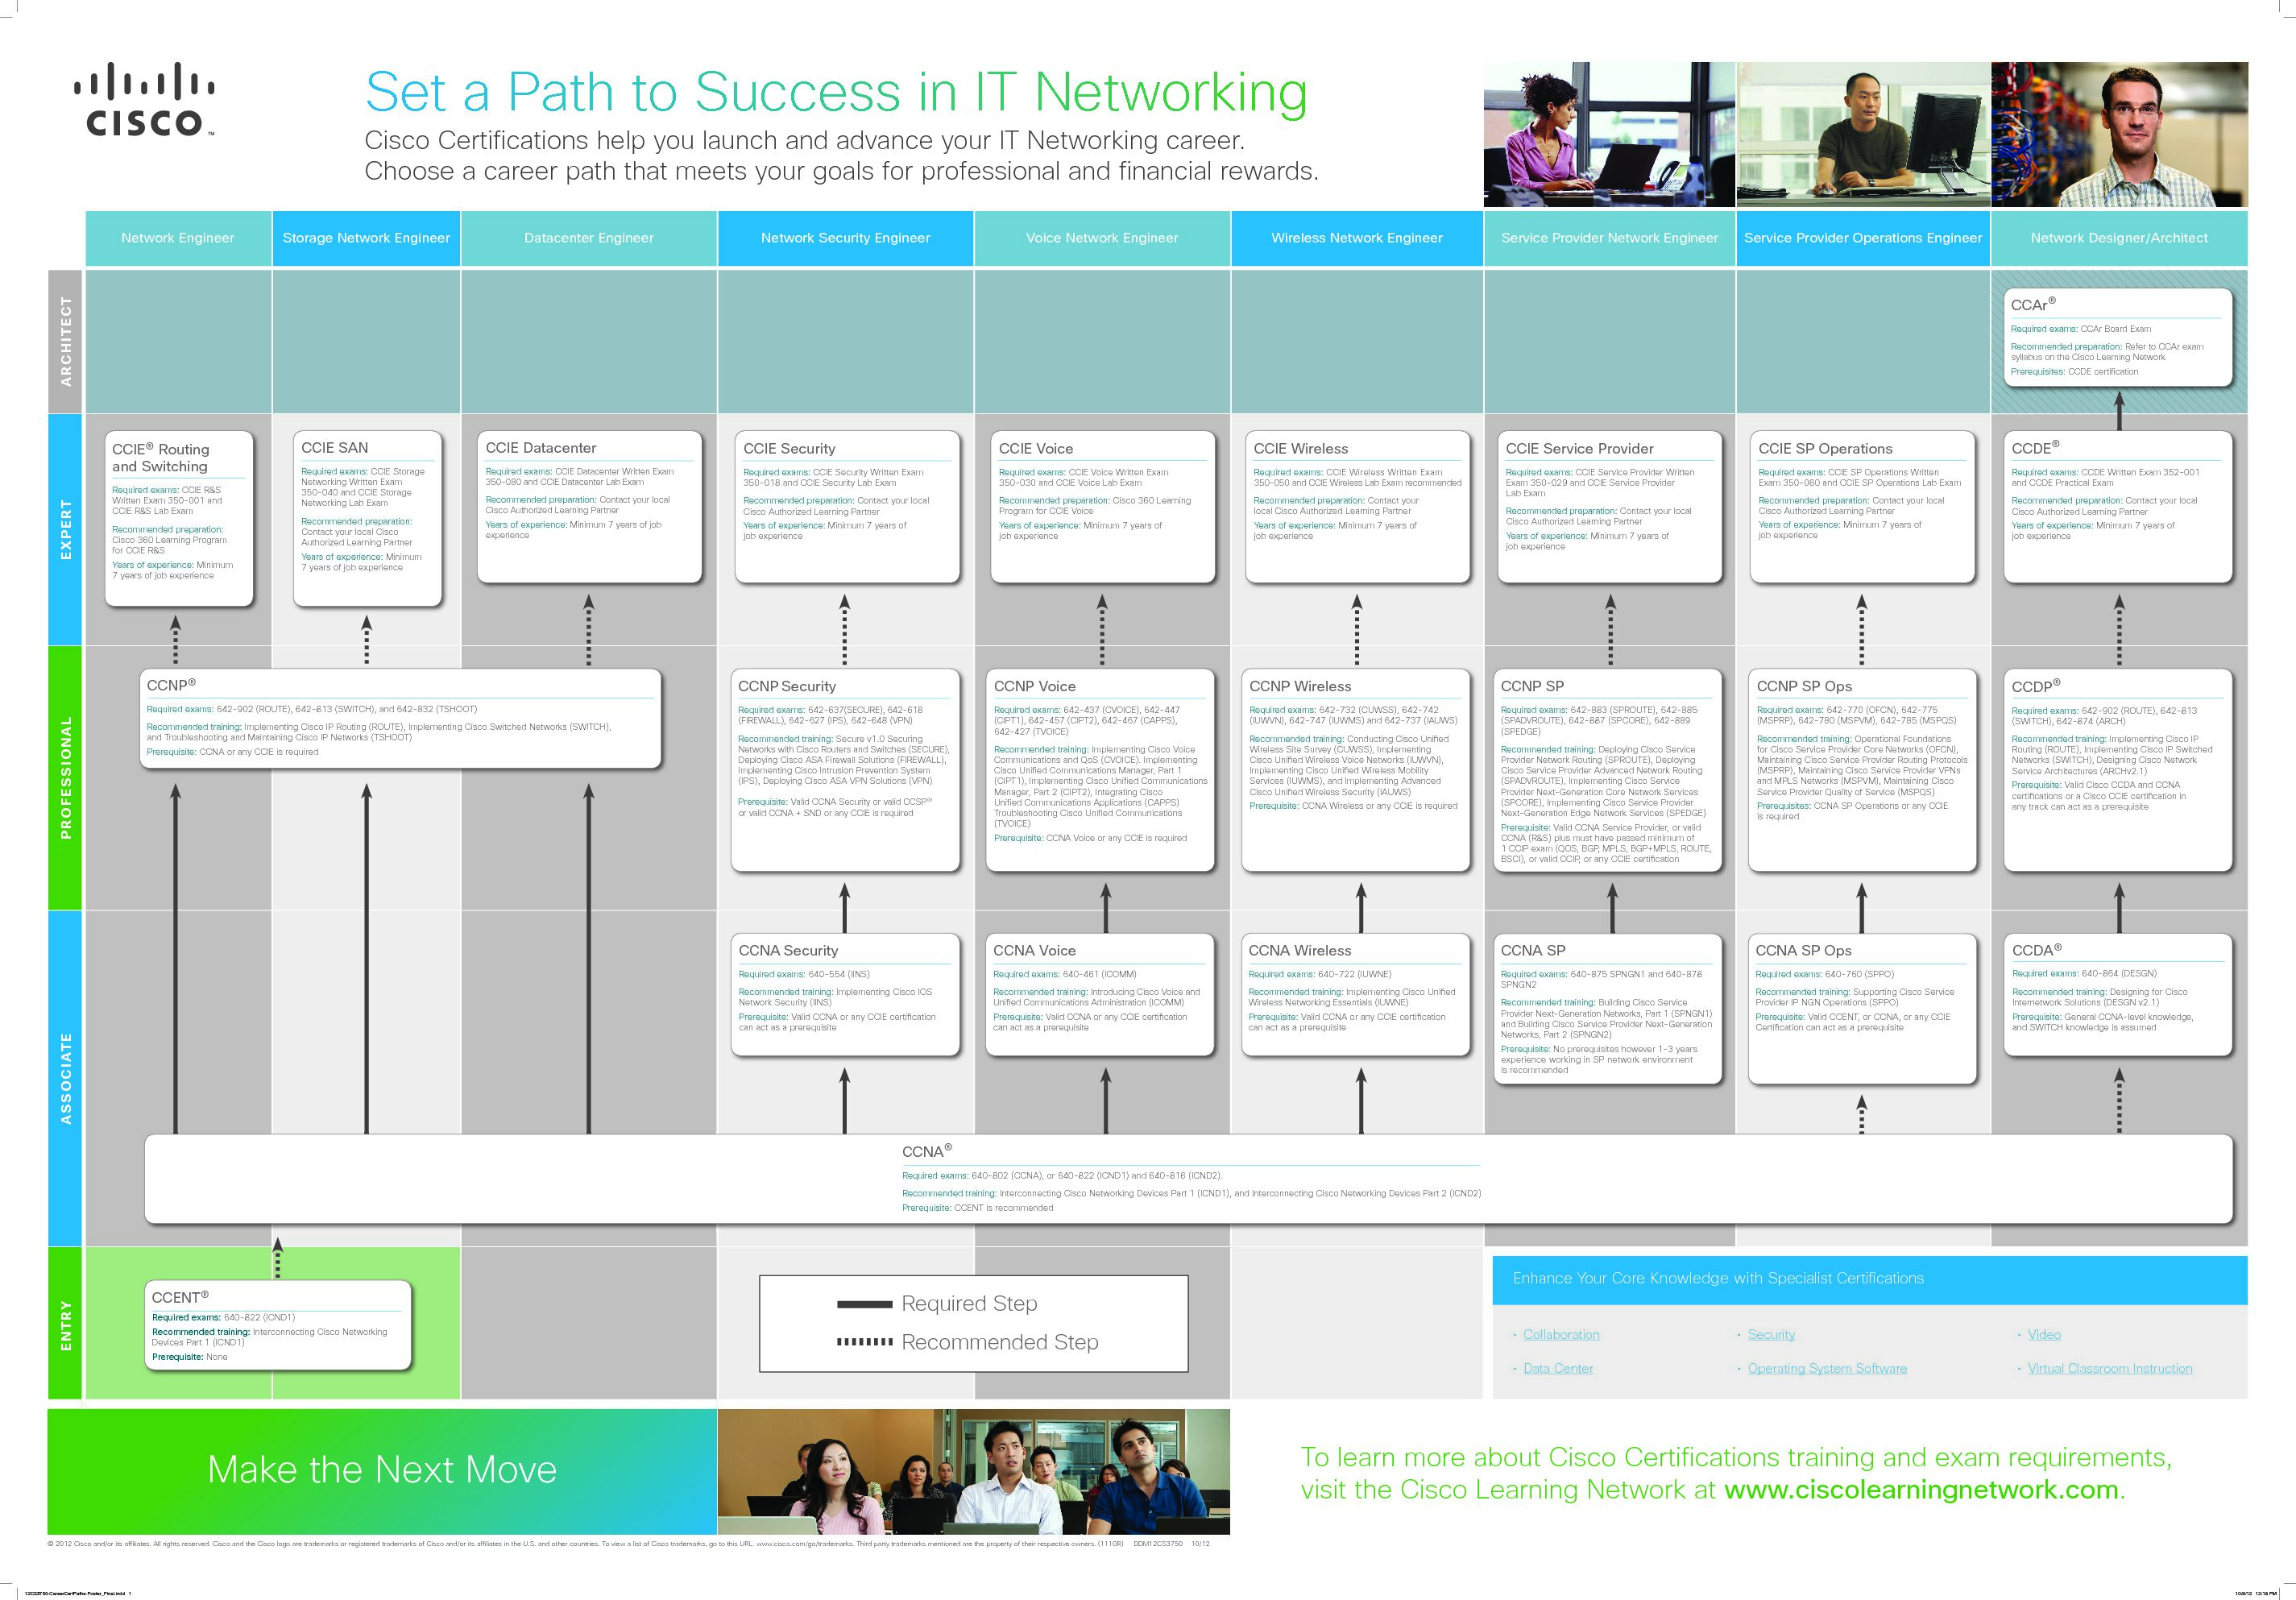 [PDF] Set a Path to Success in IT Networking - MercadoIT